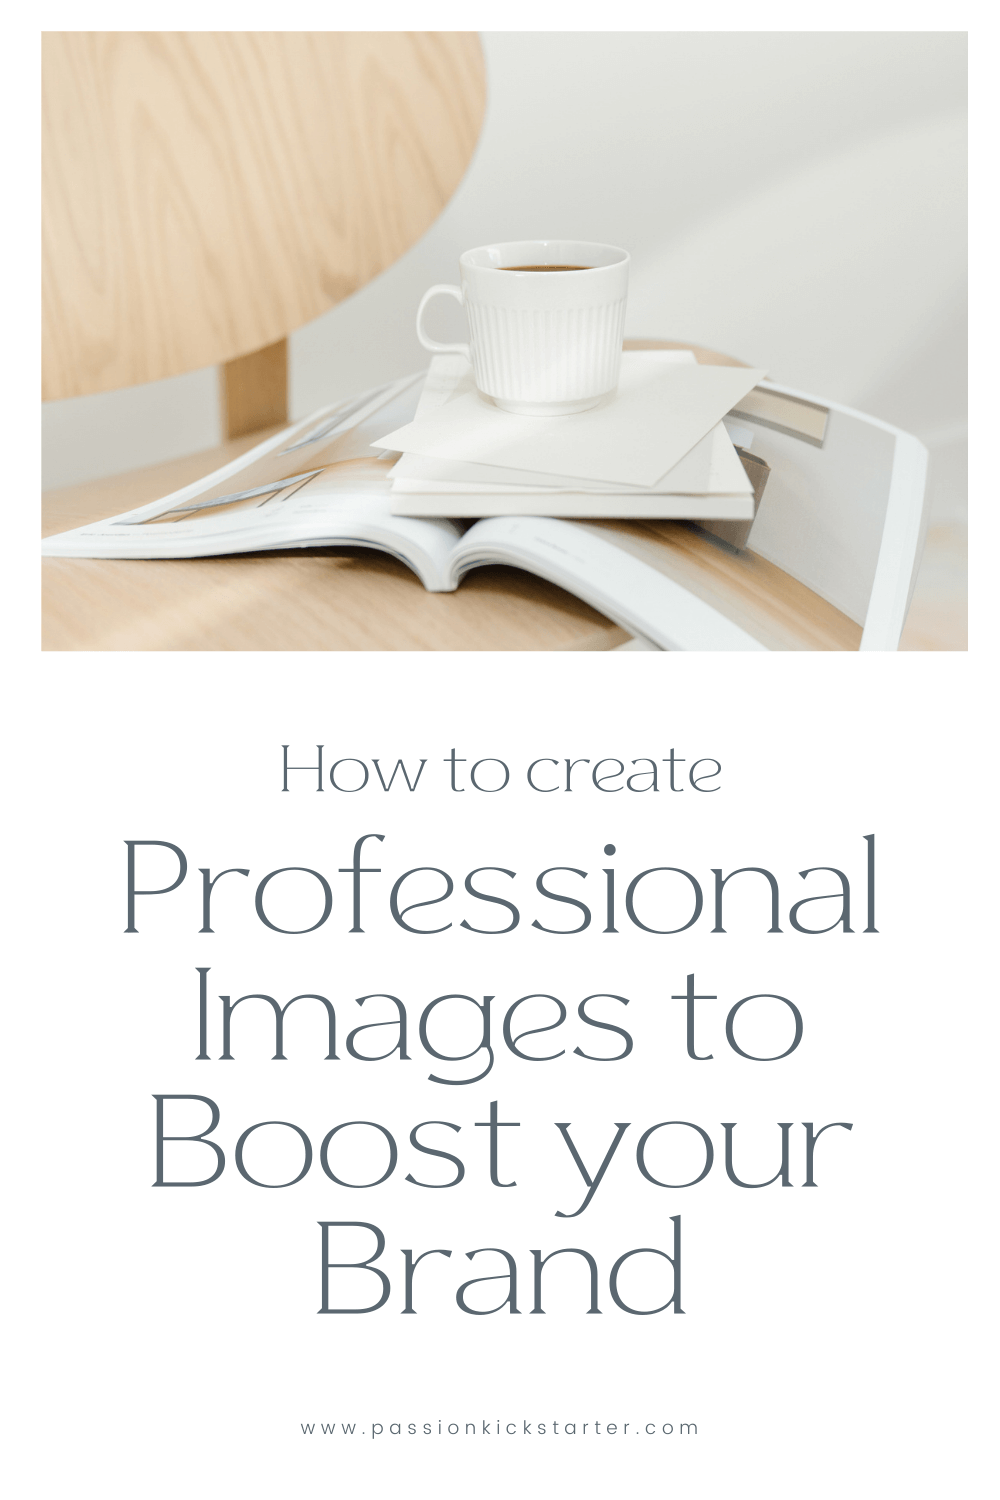 Learn-how-to-create-professional-images-to-boost-your-brand